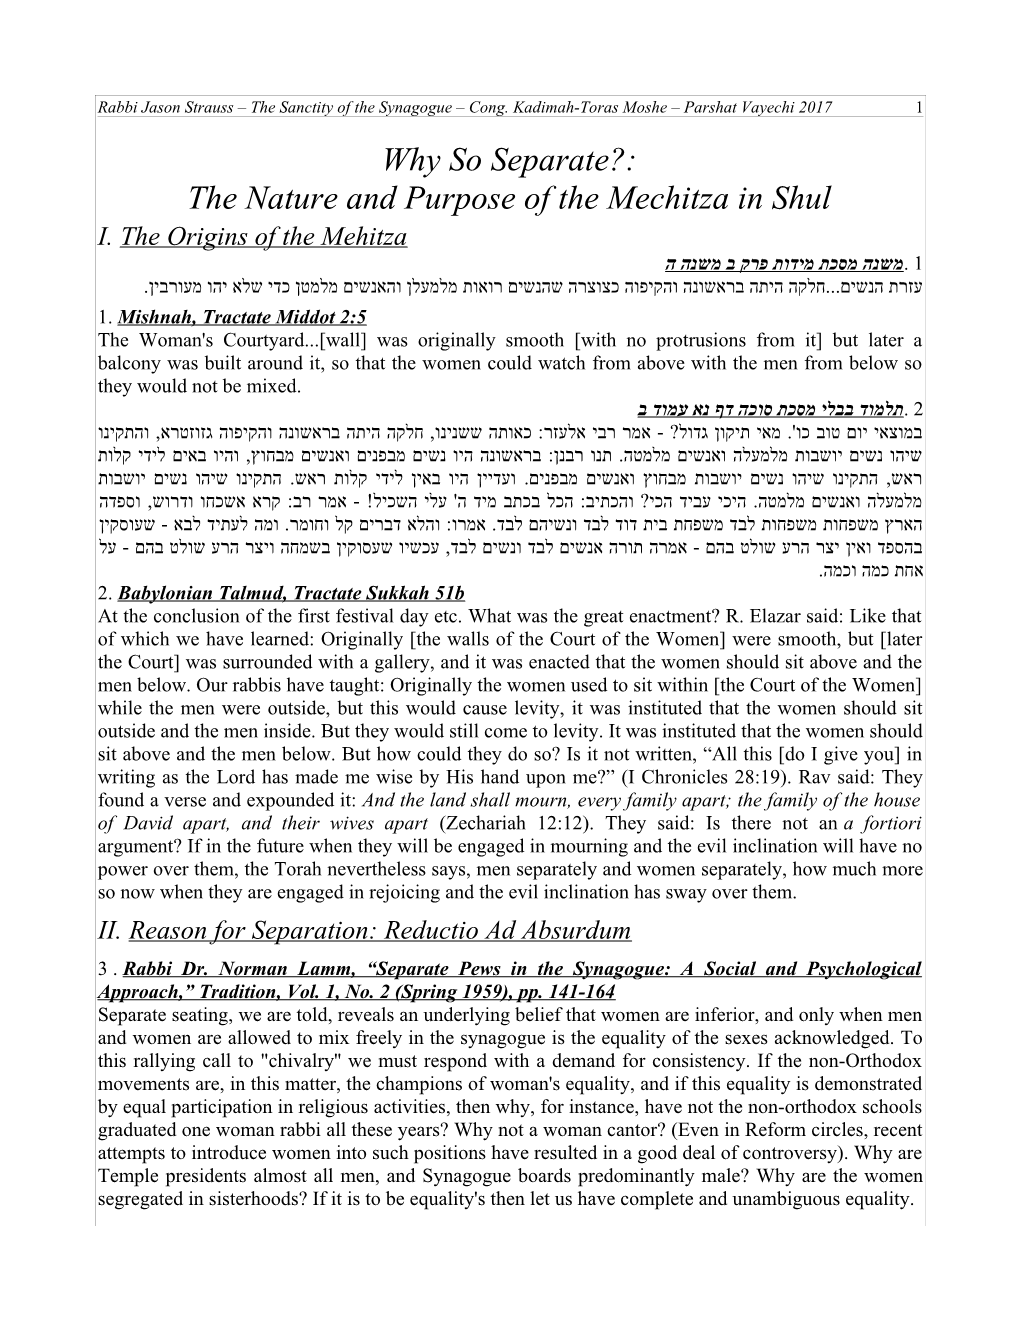 Why So Separate?: the Nature and Purpose of the Mechitza in Shul I